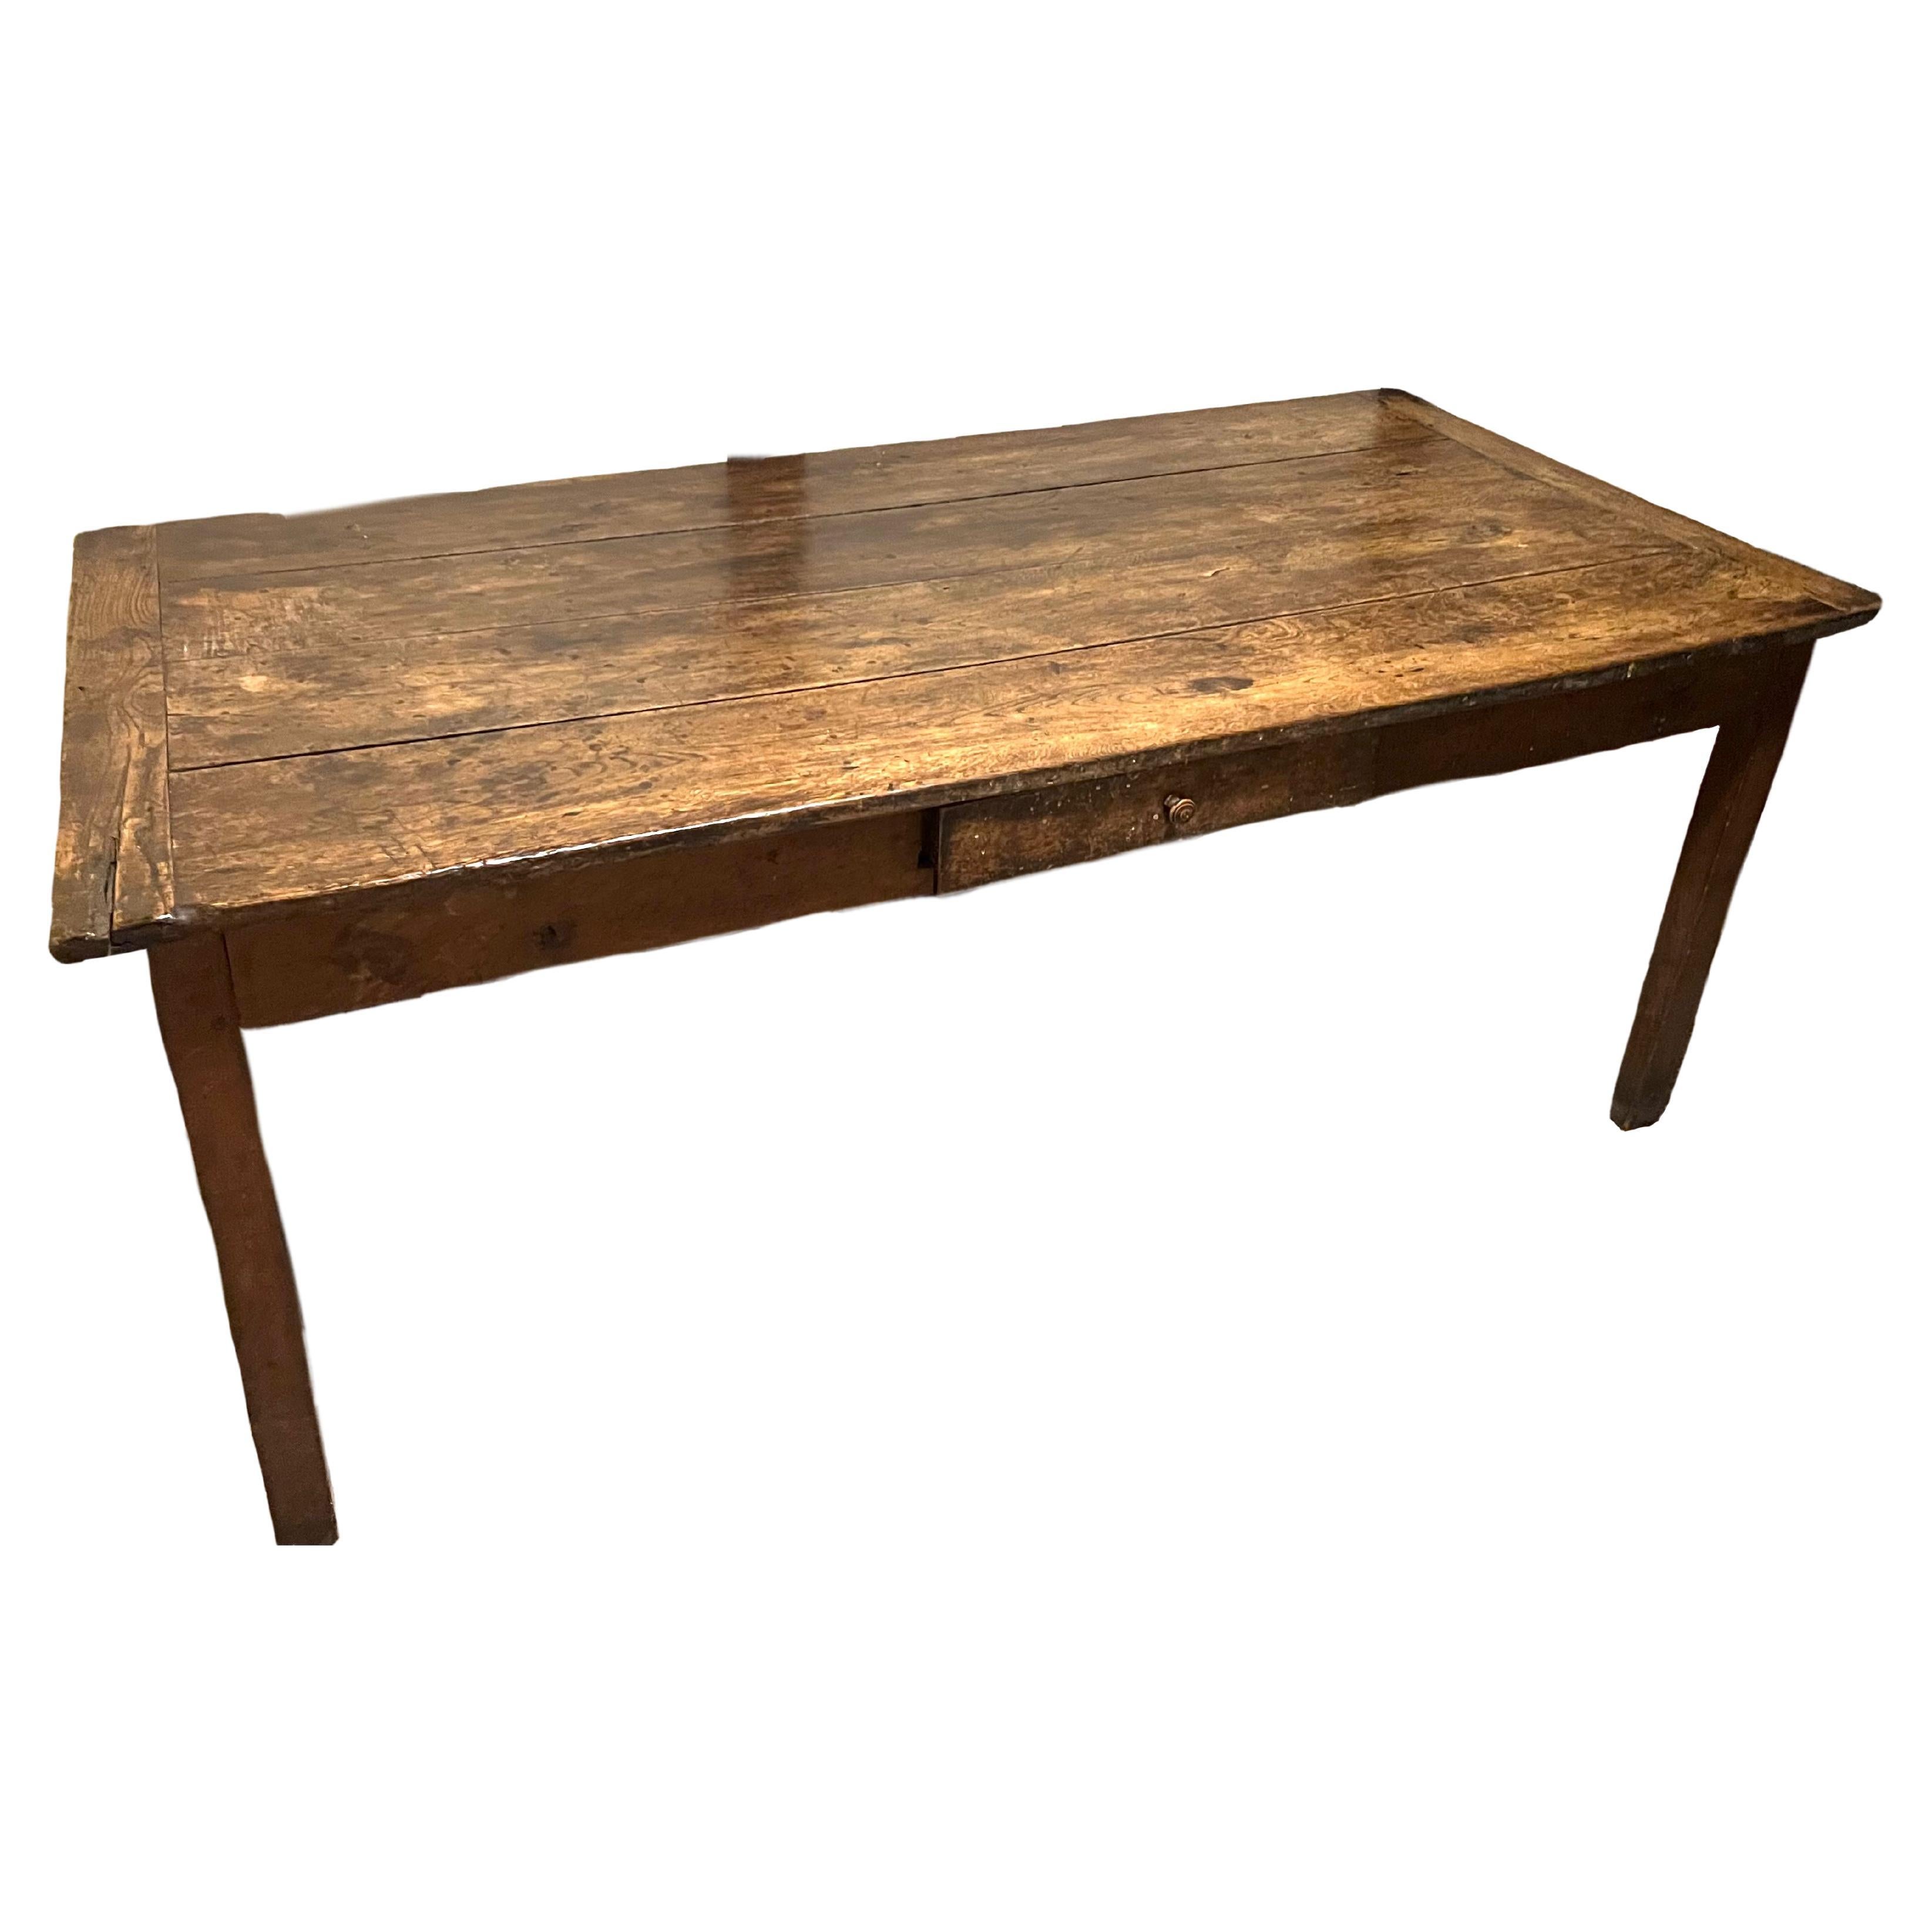 Rustic French 19th-century farmhouse table For Sale